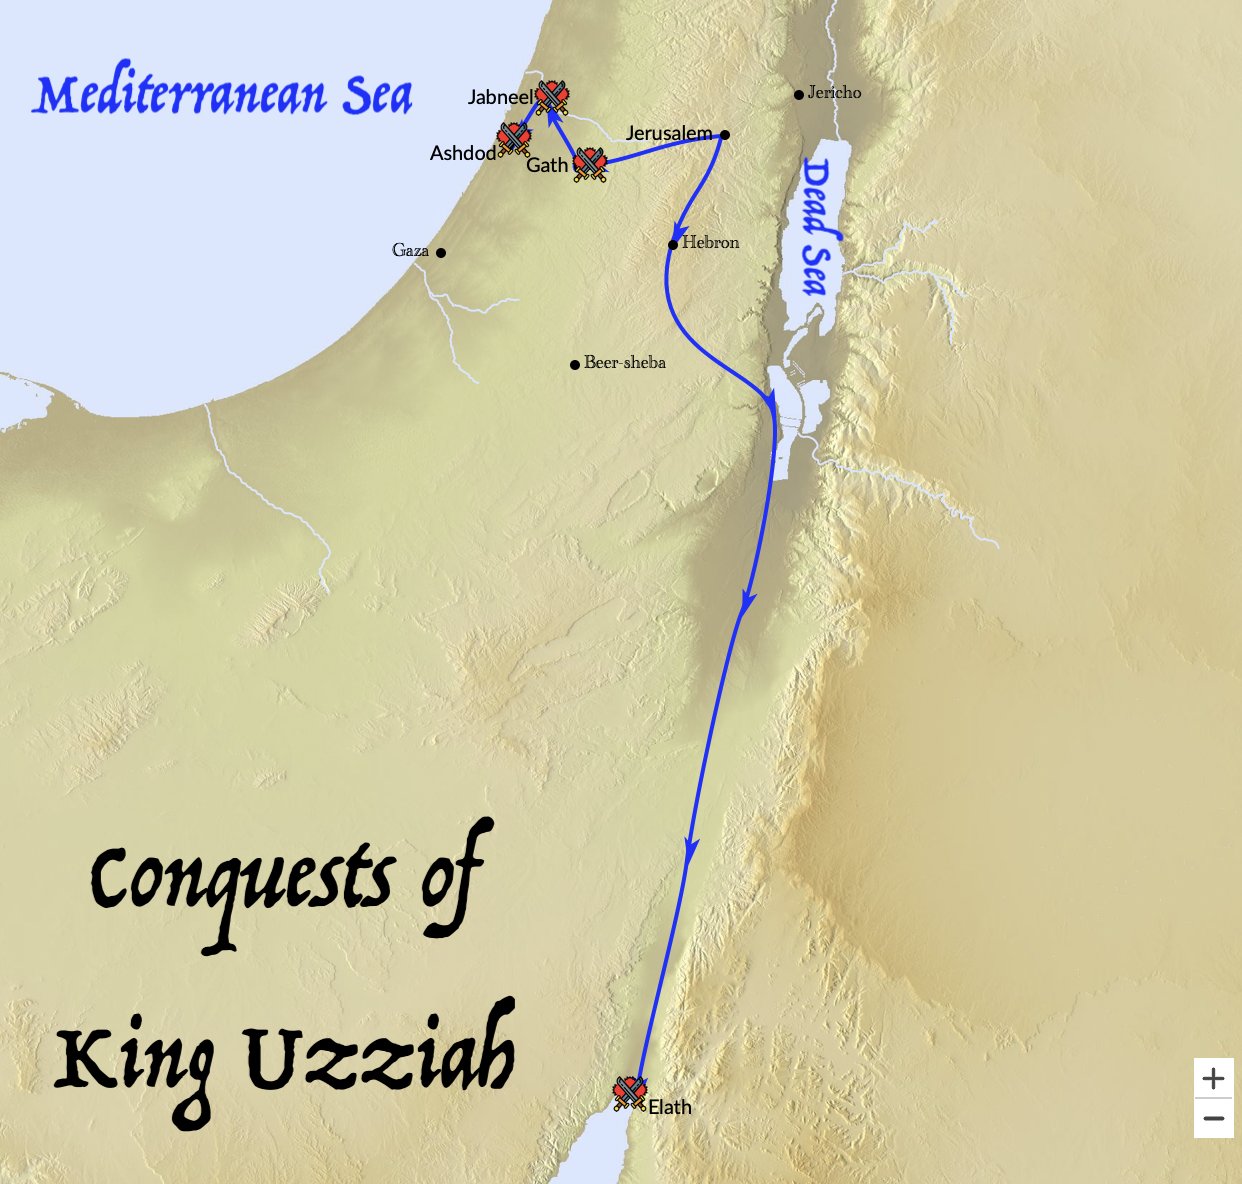 The conquests of King Uzziah.